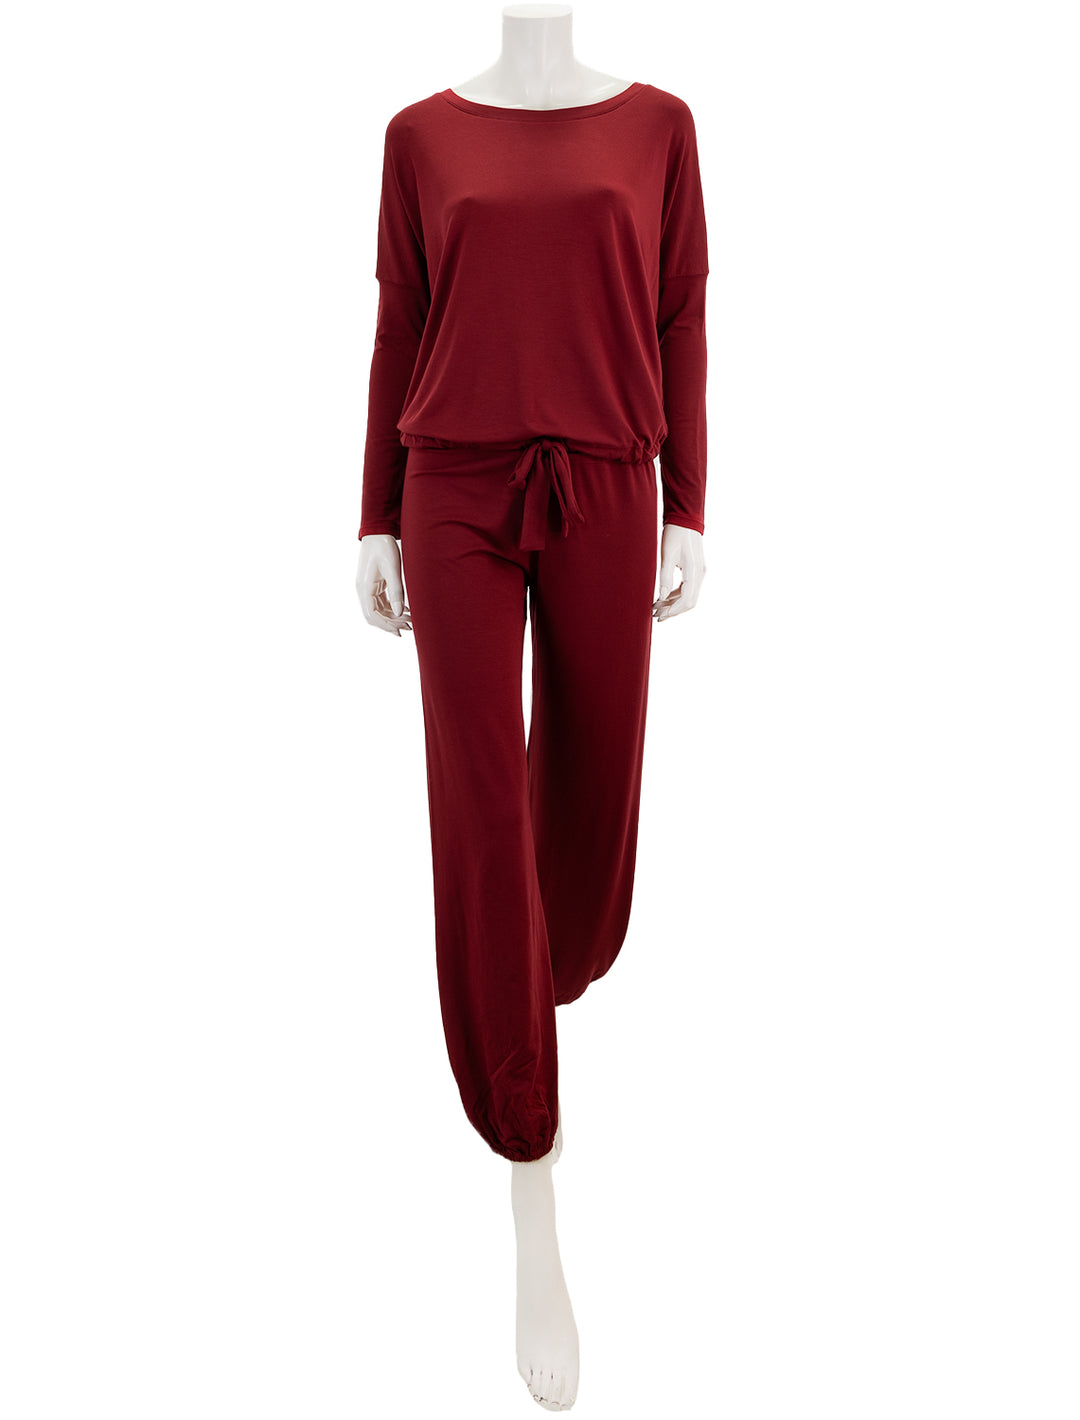 Front view of Eberjey's gisele slouchy set in sangria.